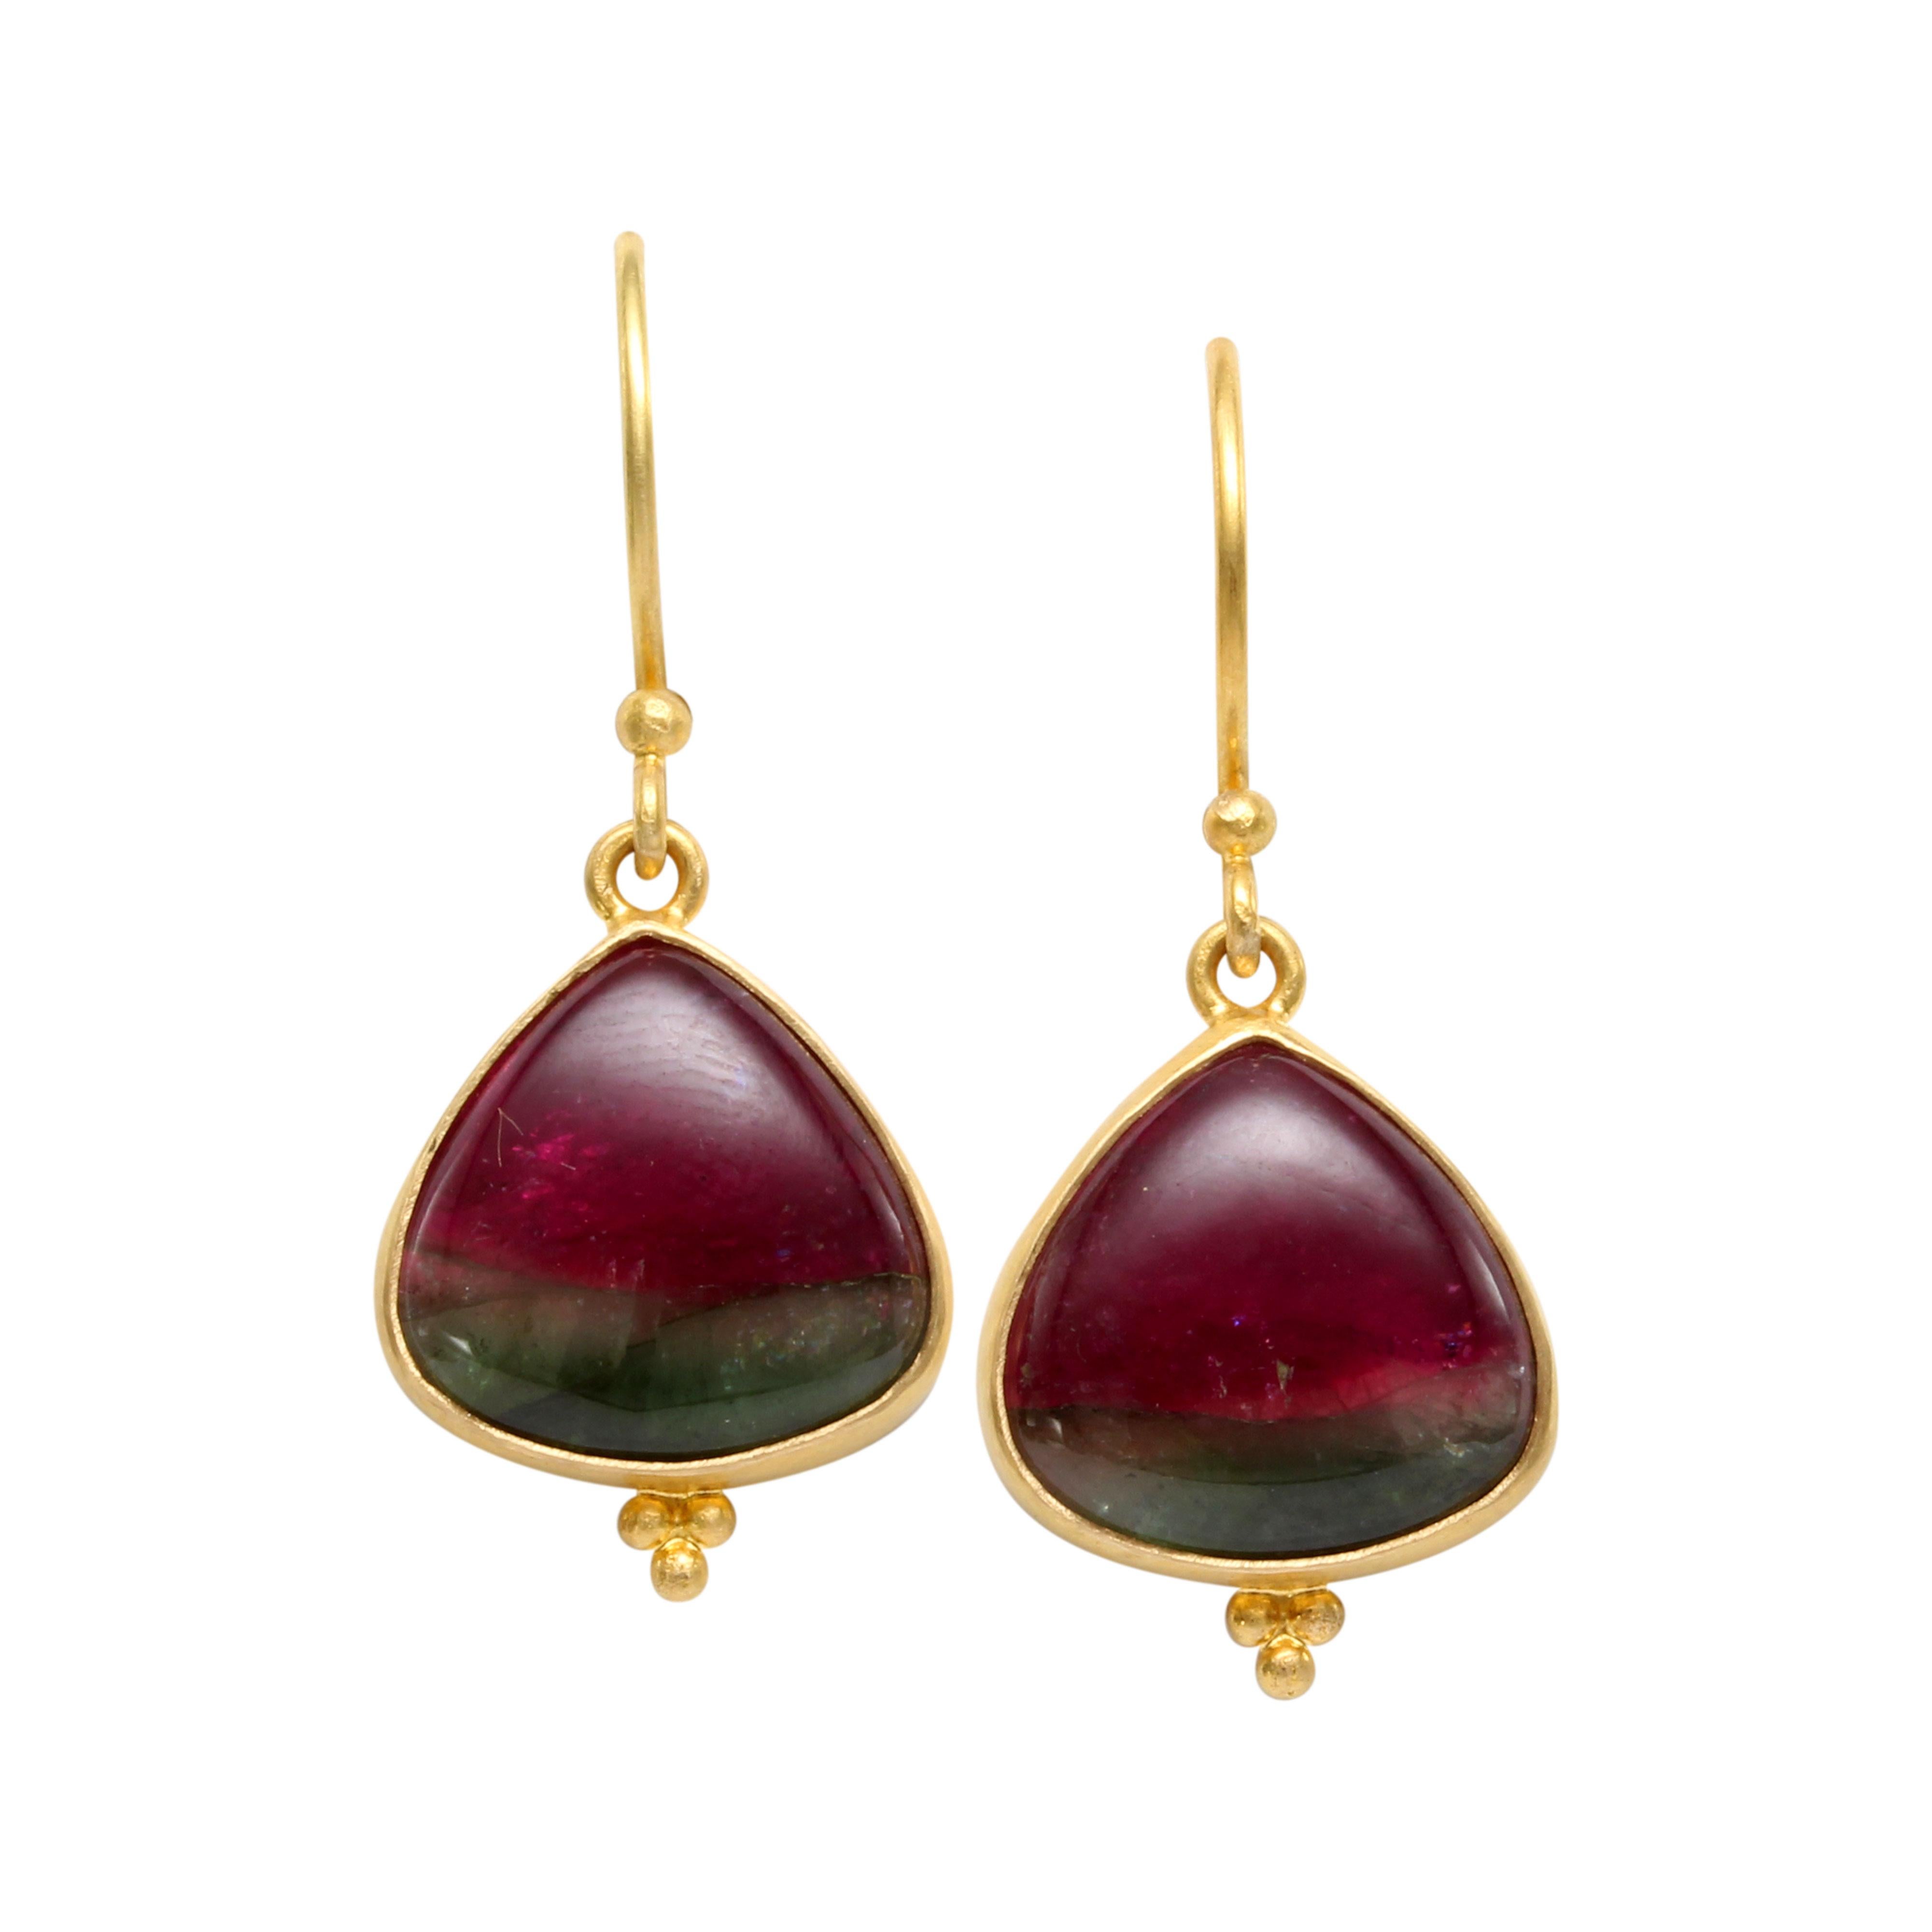 Steven Battelle 11.4 Carats Cabochon Watermelon Tourmaline 18K Wire Earrings In New Condition For Sale In Soquel, CA